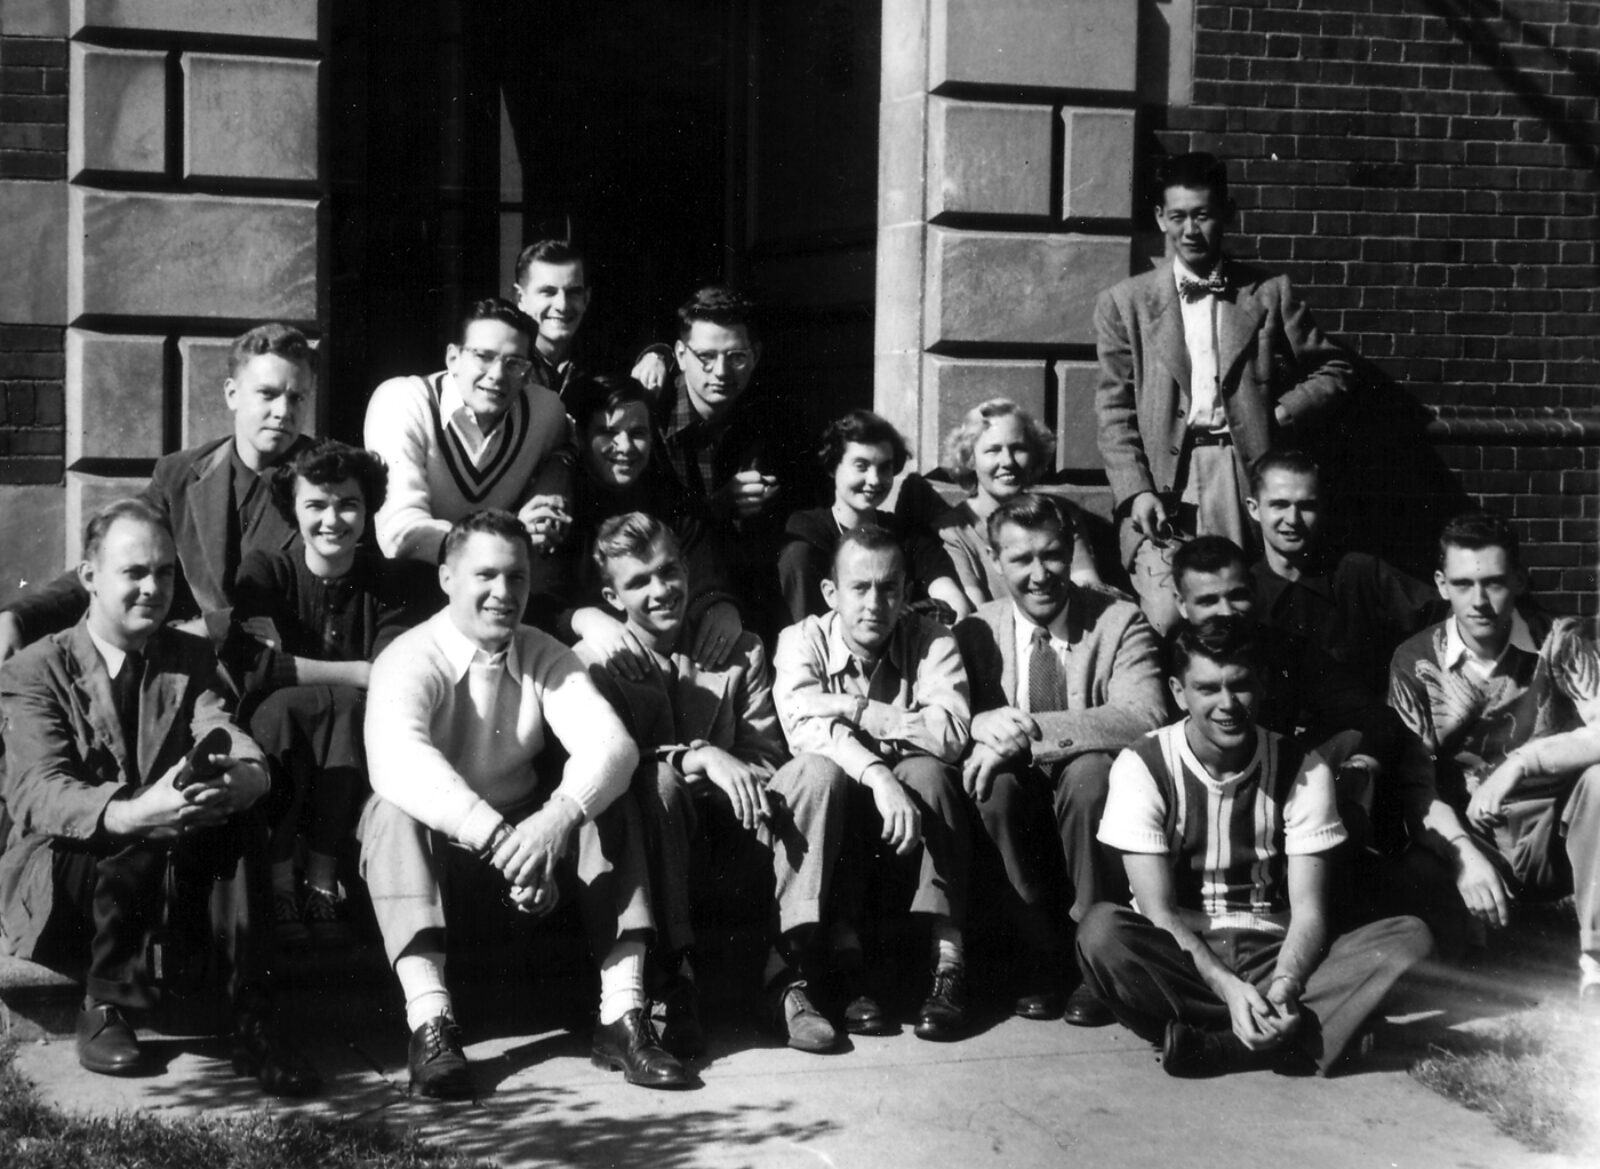 Students from the Class of 1950 with Professor Hideo Sasaki